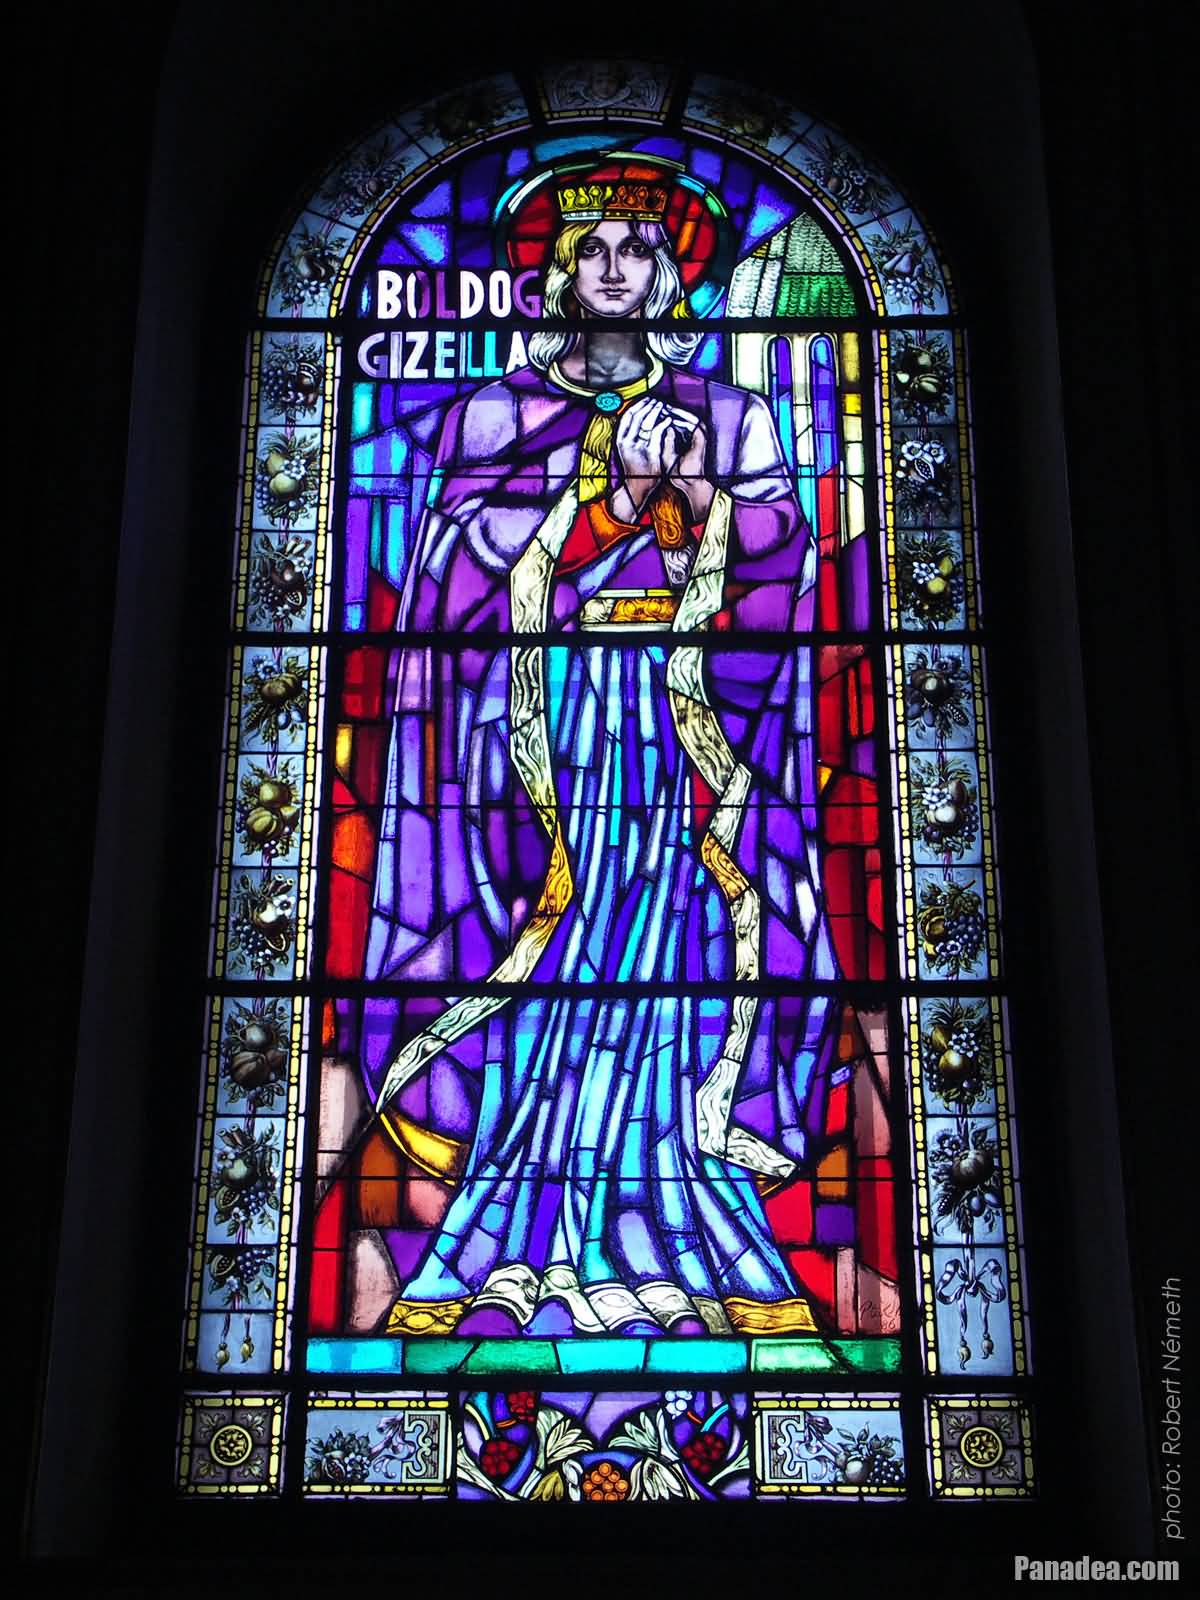 Picture Of Blessed Gisela Queen Of Hungary On A Stained Glass Window Inside The Saint Stephen's Basilica